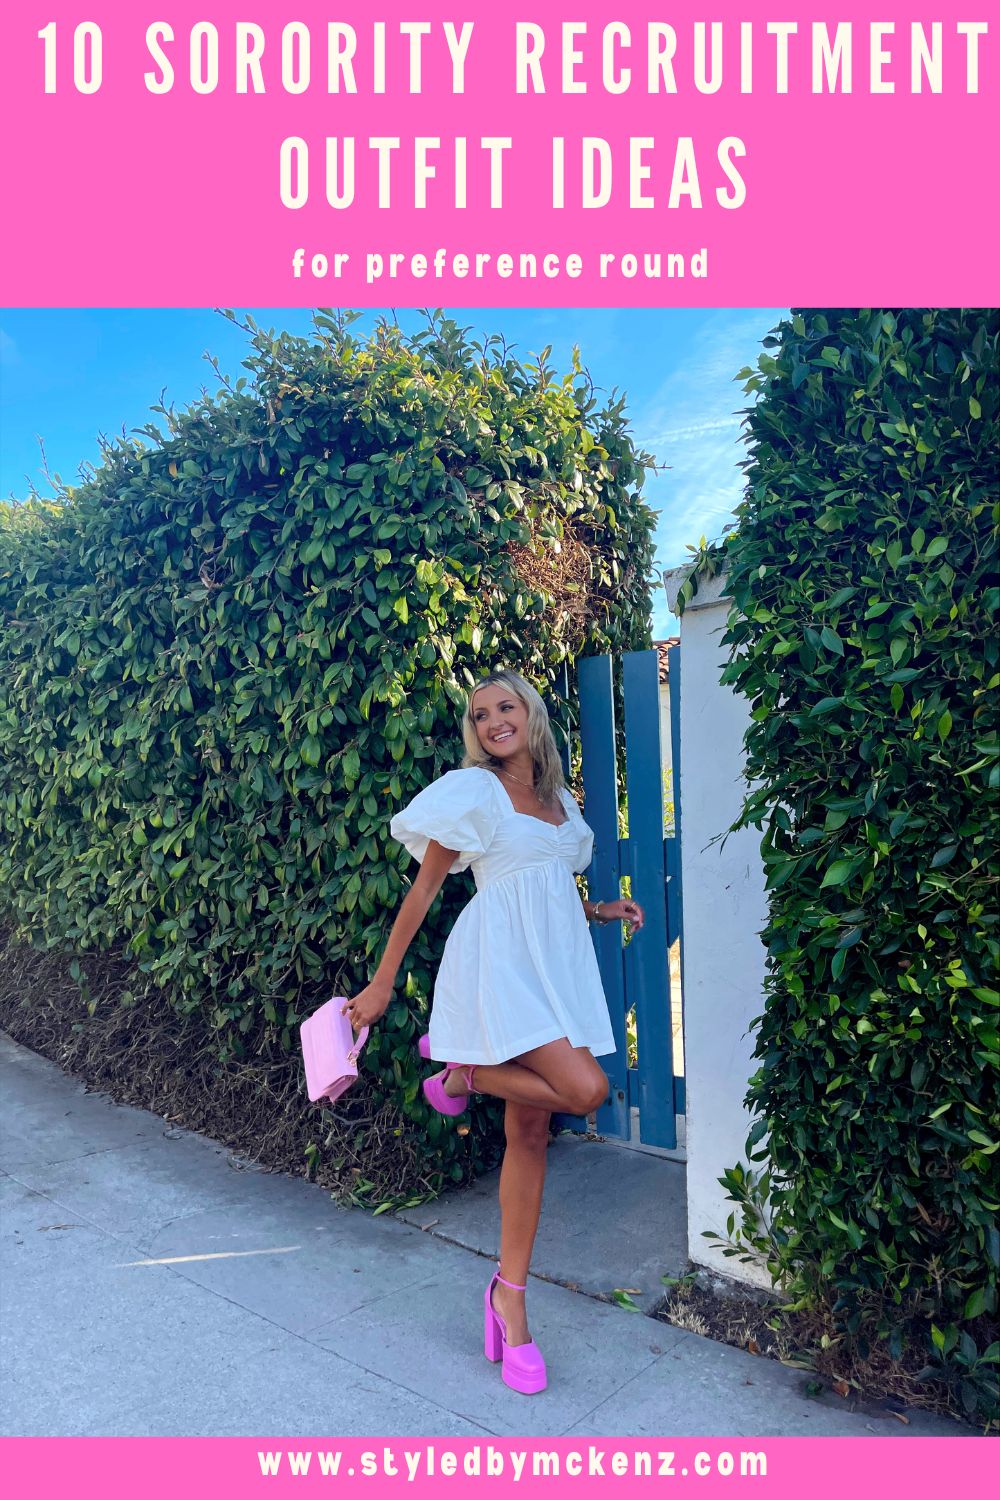 10 Outfit Ideas For Preference Round Of Sorority Recruitment